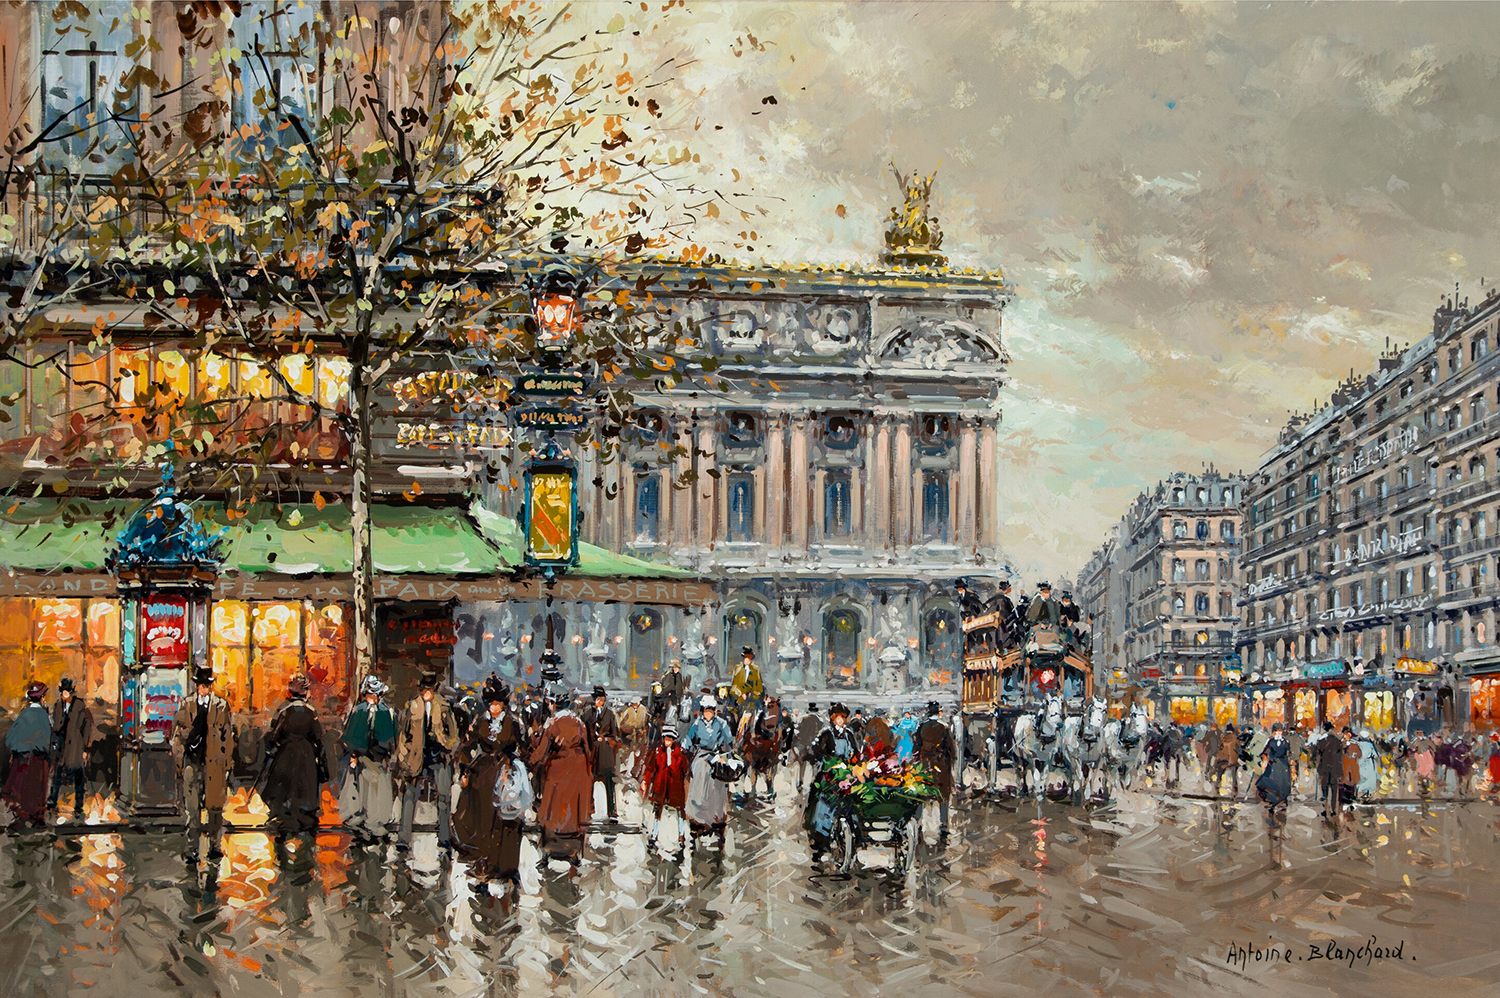 cafe de la paix and the opera house in paris with people and horses and carts on street